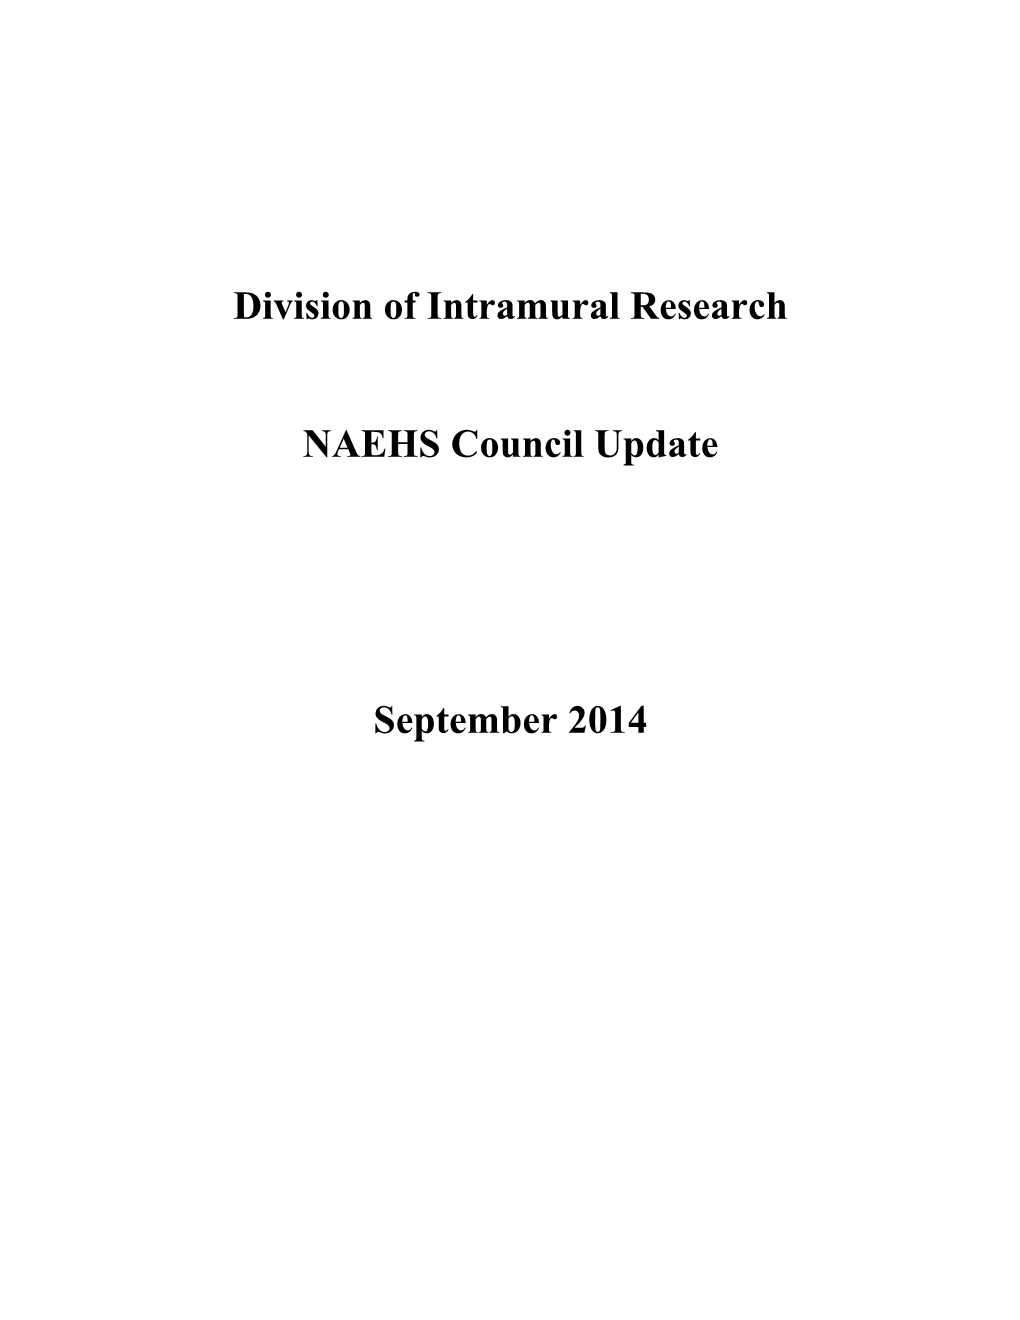 NAEHS Council Update